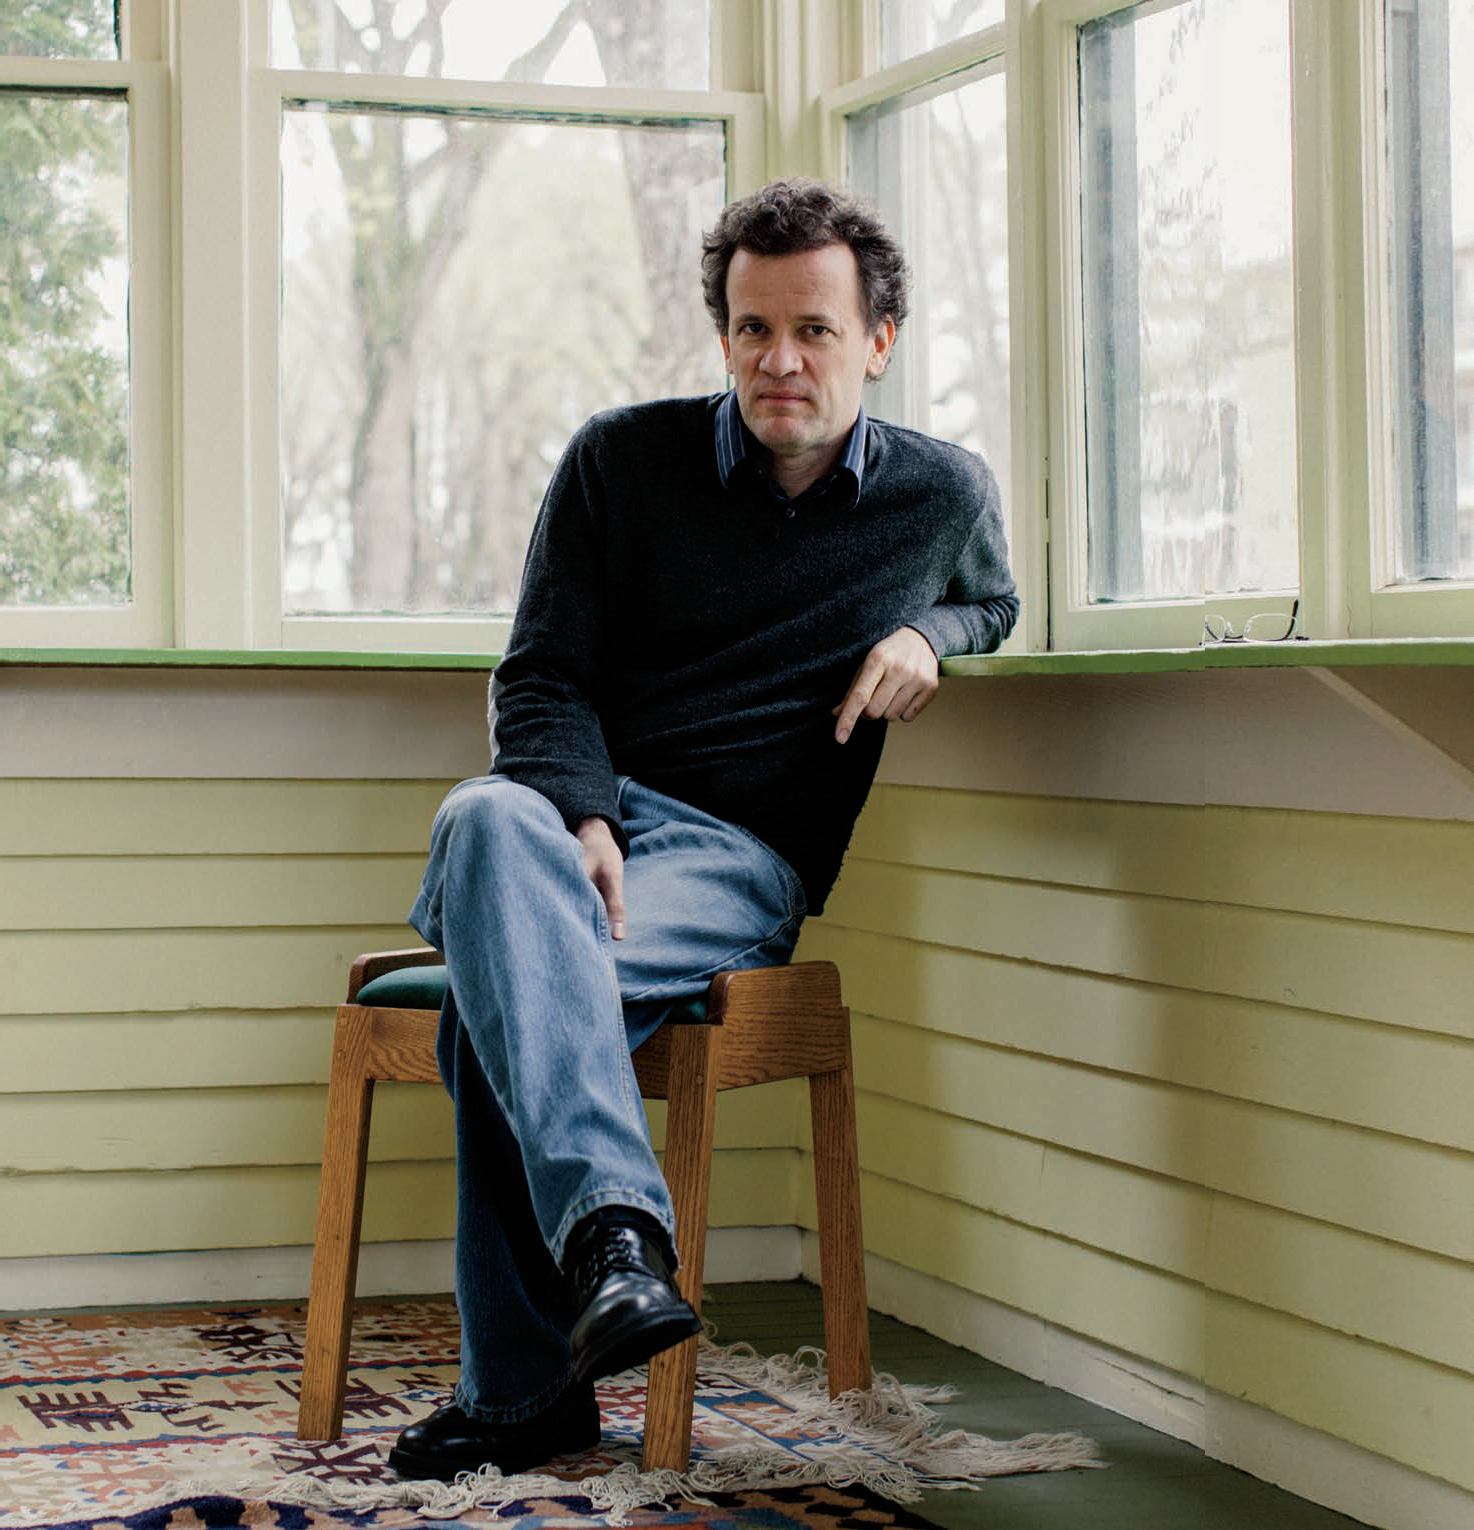 Photo of Bestselling author Yann Martel sitting on a stool and leaning on the windowsill. Yann is looking intently at the camera.